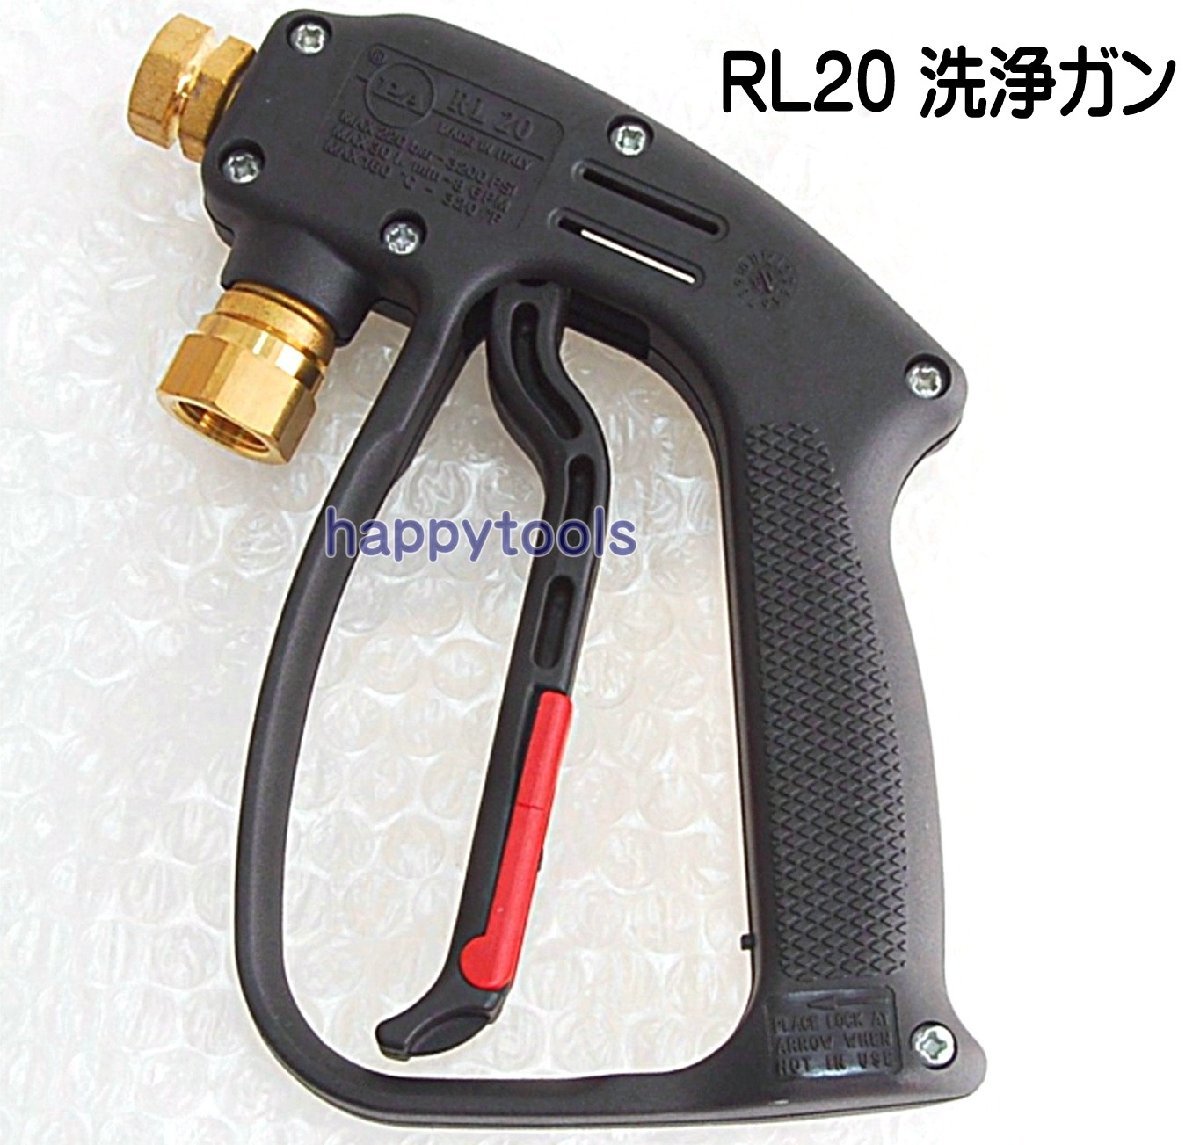  stock have RL20 hot water high pressure washer for washing gun hill . tooth car MR-30-2 safety automobile AHW1015A. correspondence in voice correspondence cash on delivery shipping un- possible nationwide free shipping tax included special price 